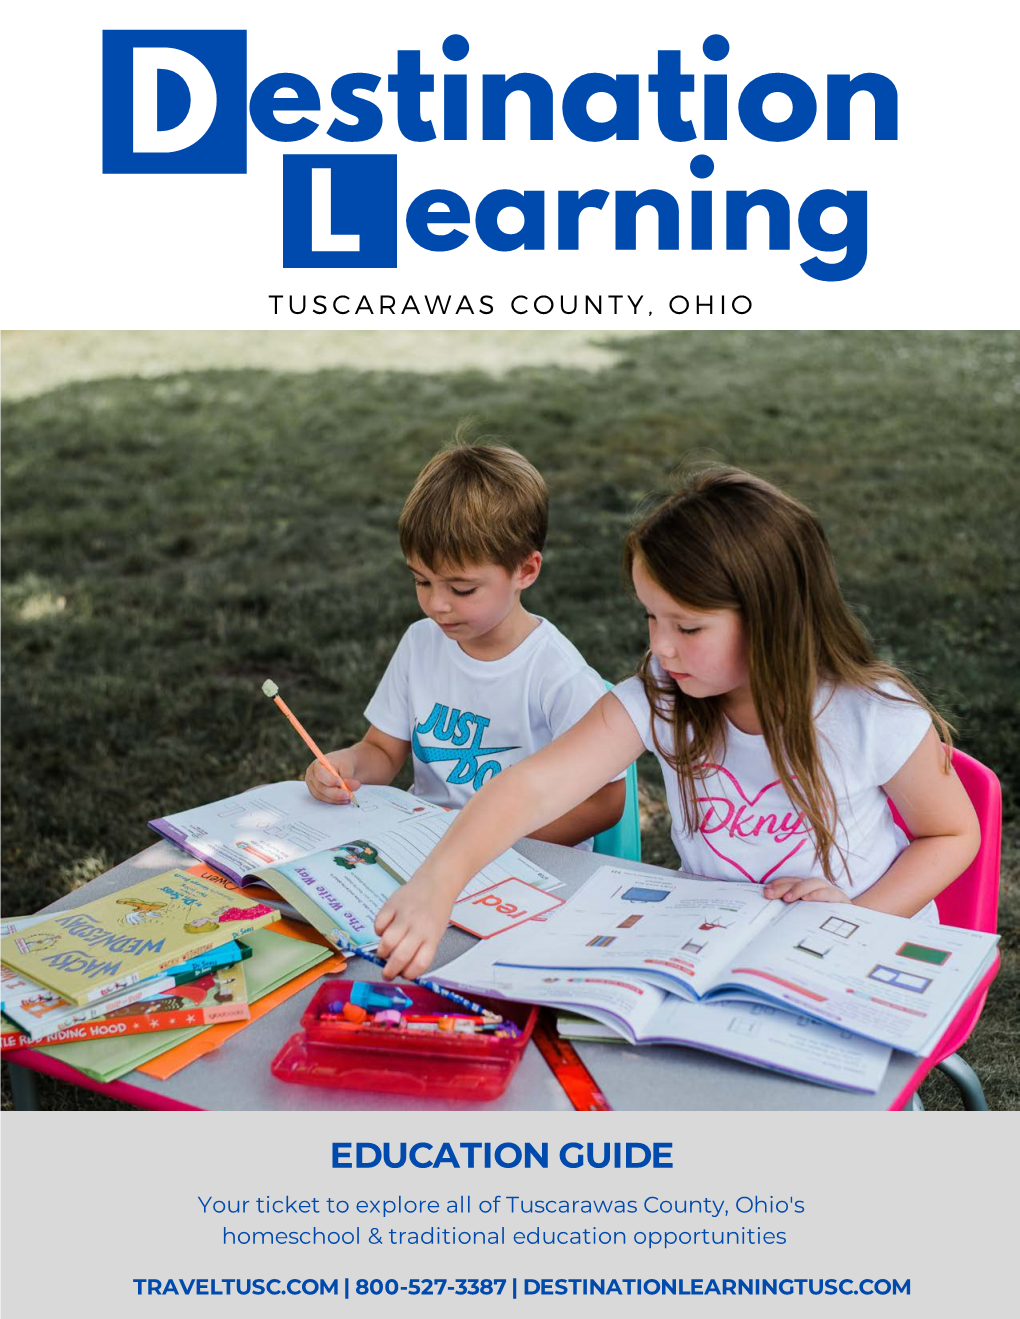 EDUCATION GUIDE Your Ticket to Explore All of Tuscarawas County, Ohio's Homeschool & Traditional Education Opportunities